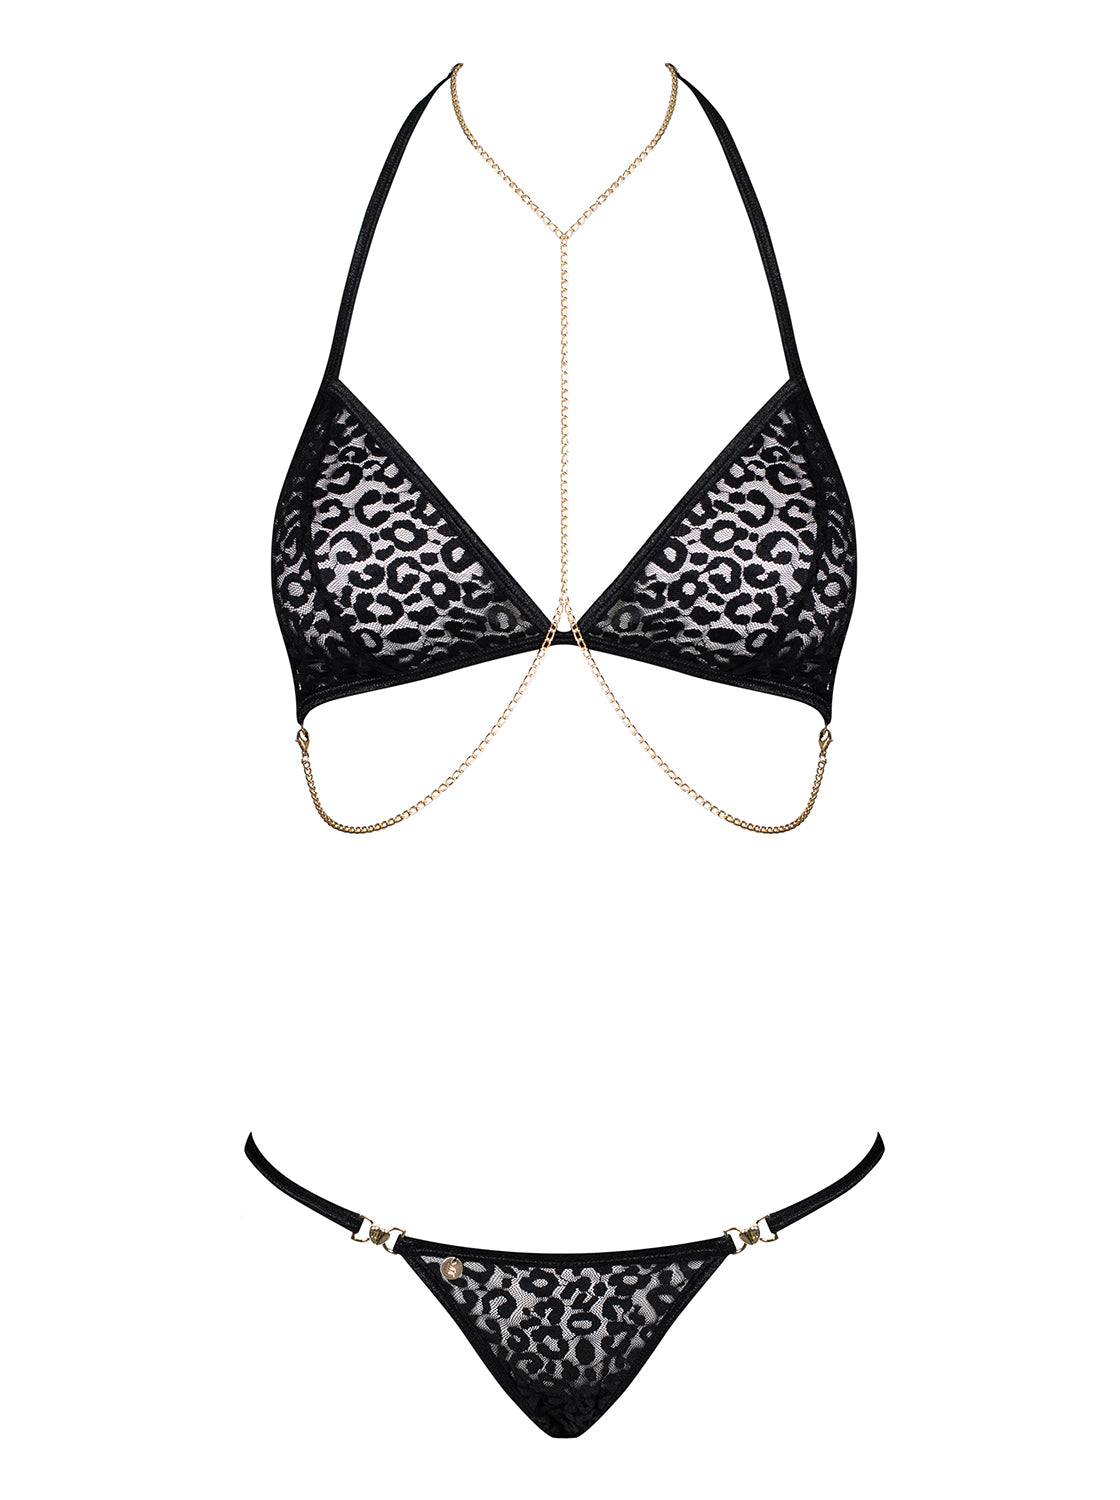 Pantheria Hot black leopard print mesh set with beautiful chain details